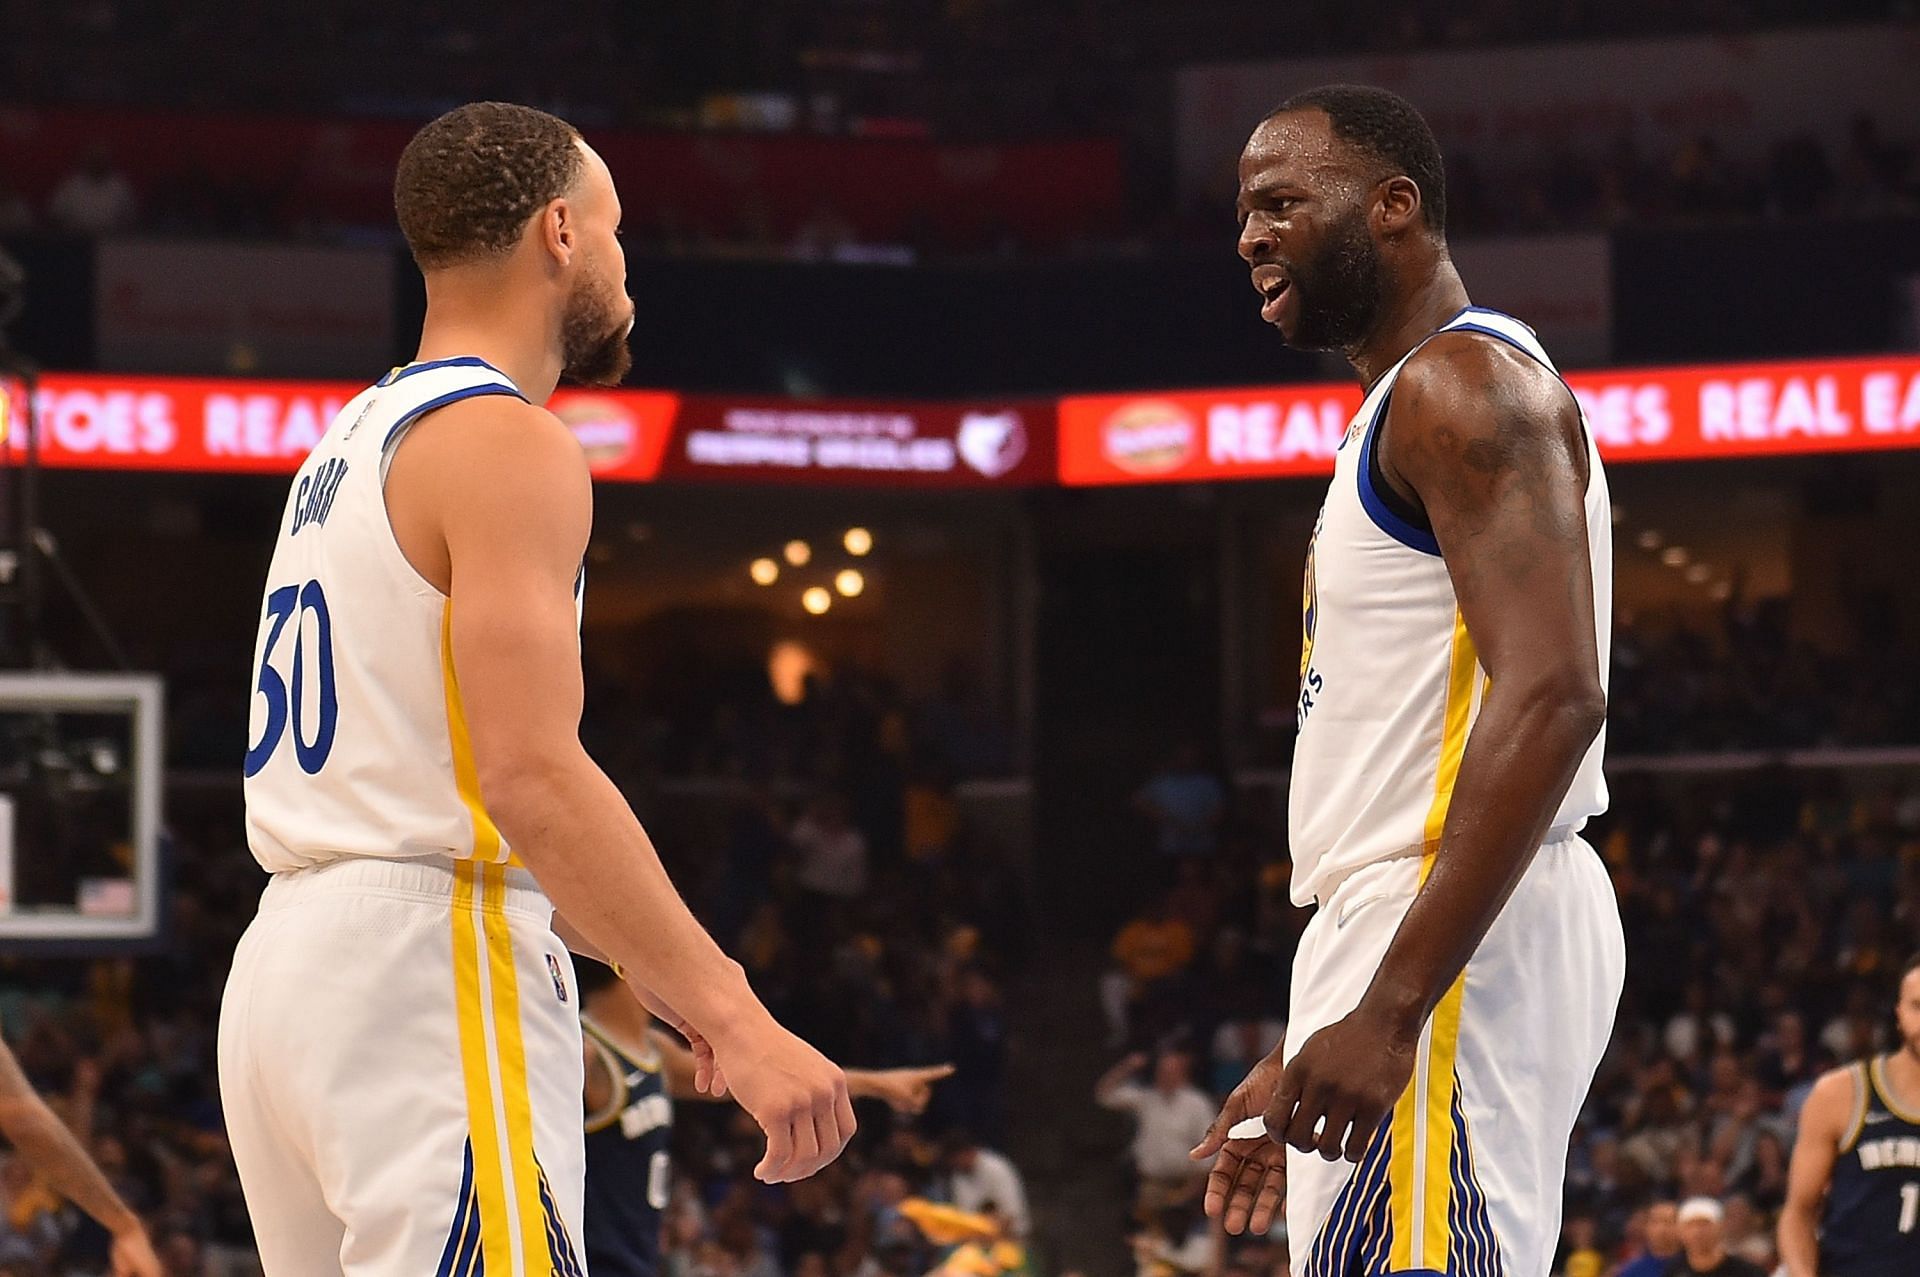 Draymond Green is expecting a more physical Golden State Warriors team in Game 3.